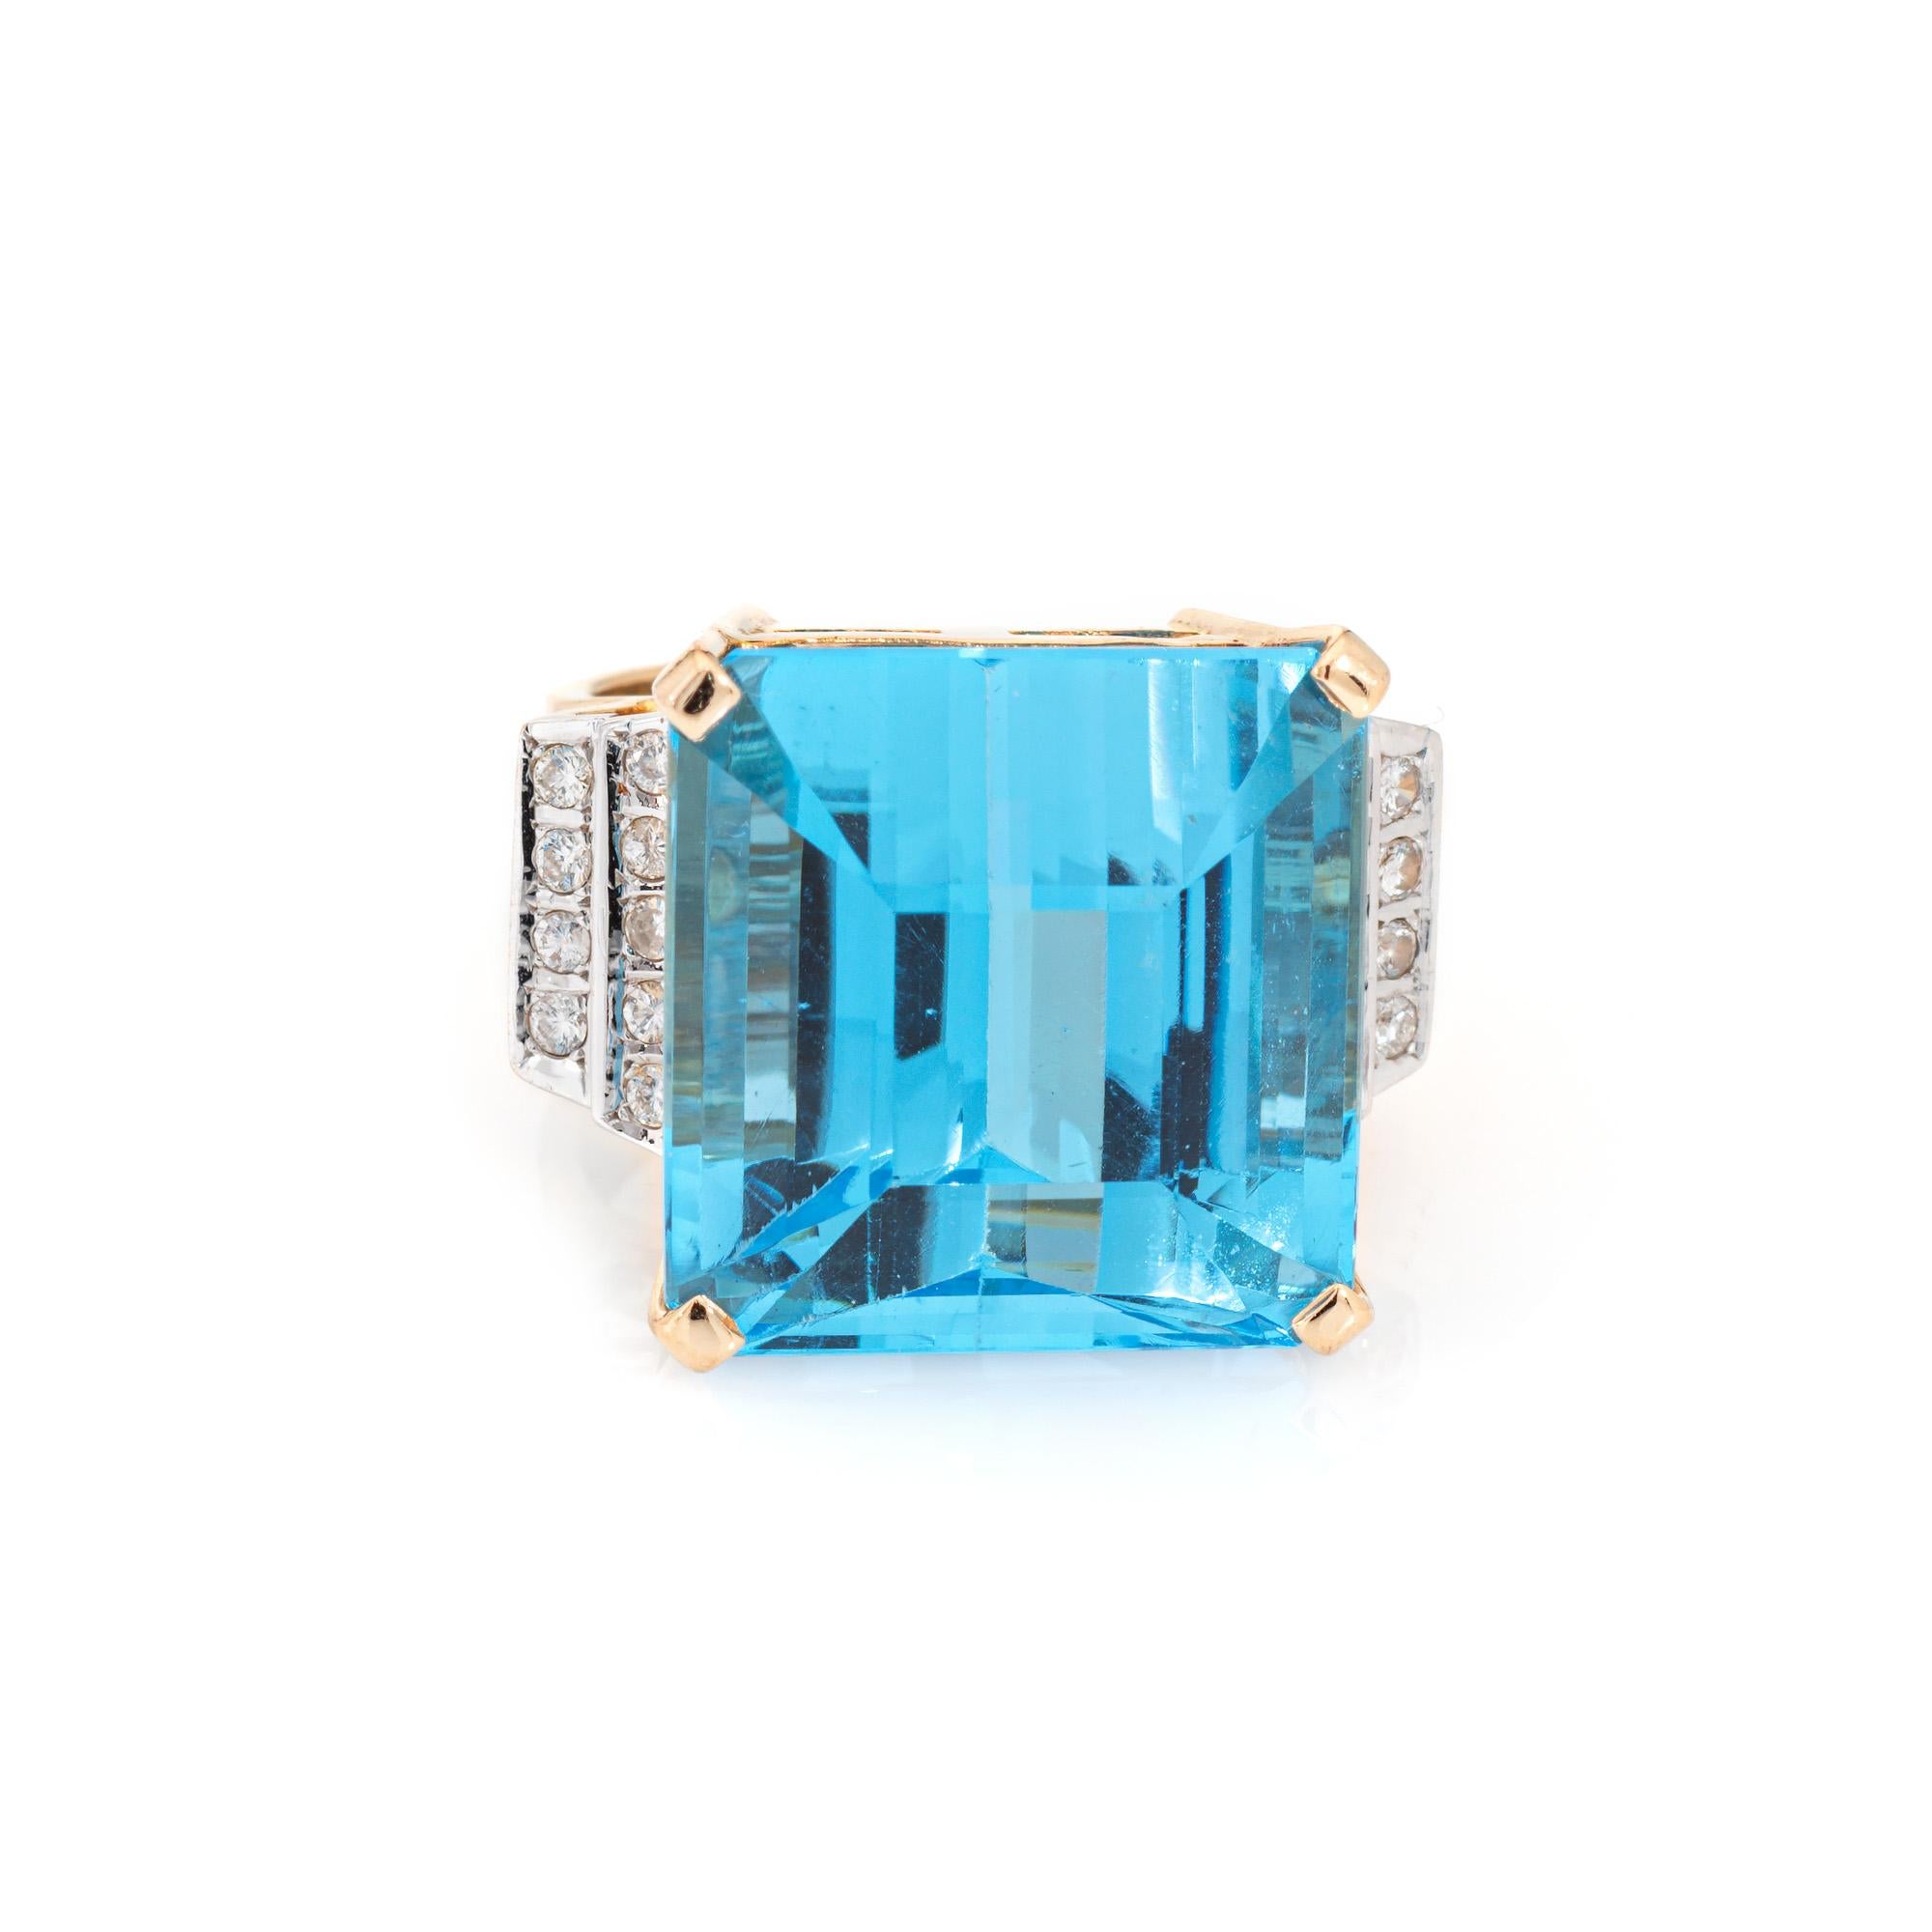 Stylish and finely detailed blue topaz & diamond cocktail ring crafted in 14 karat yellow gold (circa 1970s to 1980s).

Emerald cut blue topaz measures 17.5mm x 17mm (estimated at 35 carats). Diamonds total an estimated 0.18 carats (estimated at L-M